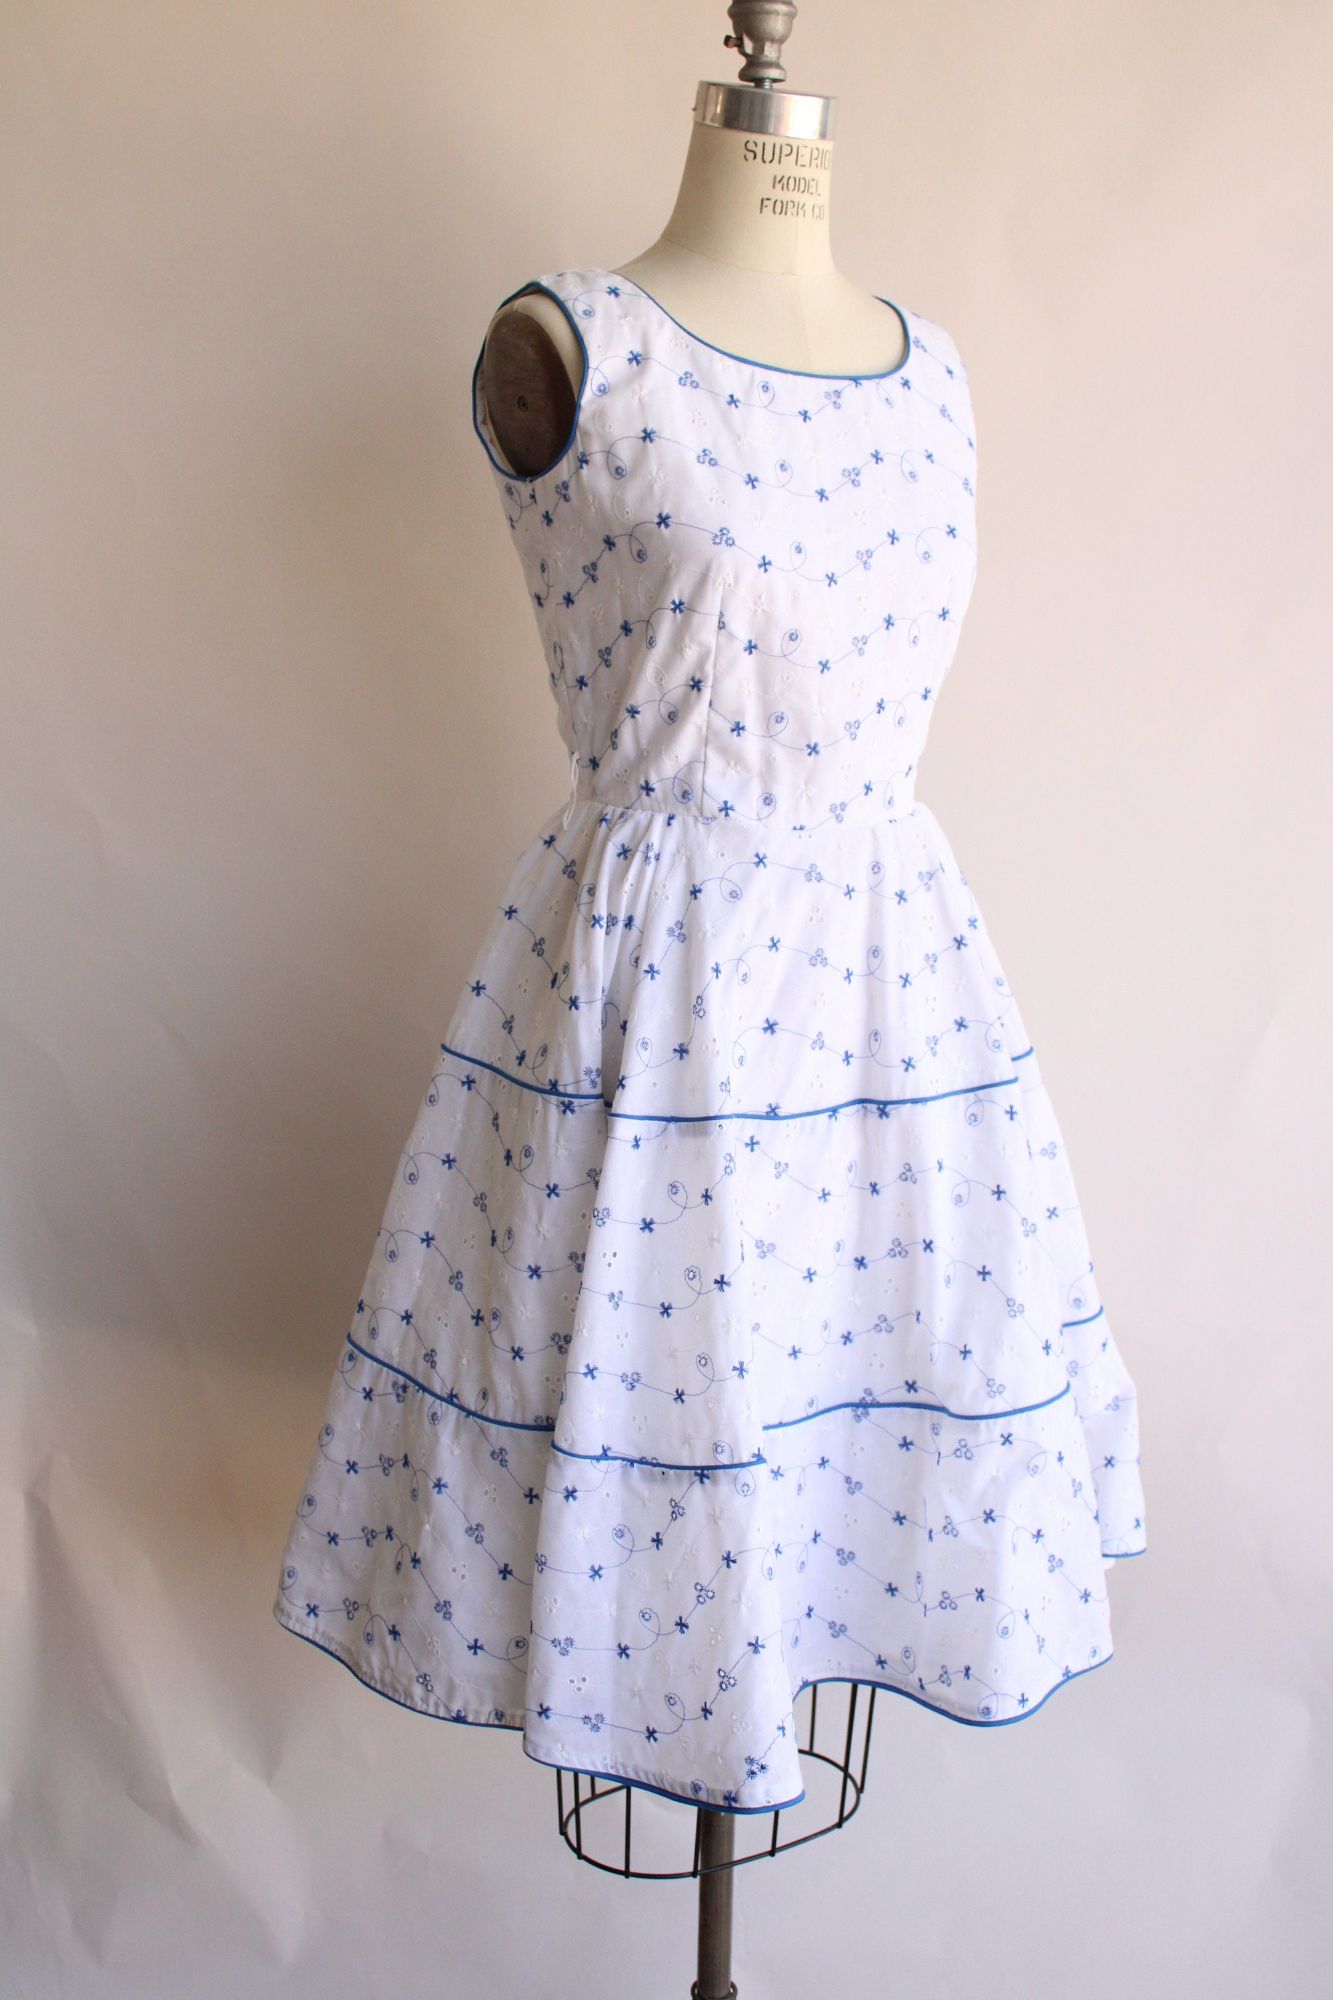 Vintage 1970s 1980s Square Dance Co Blue and White Eyelet Dress